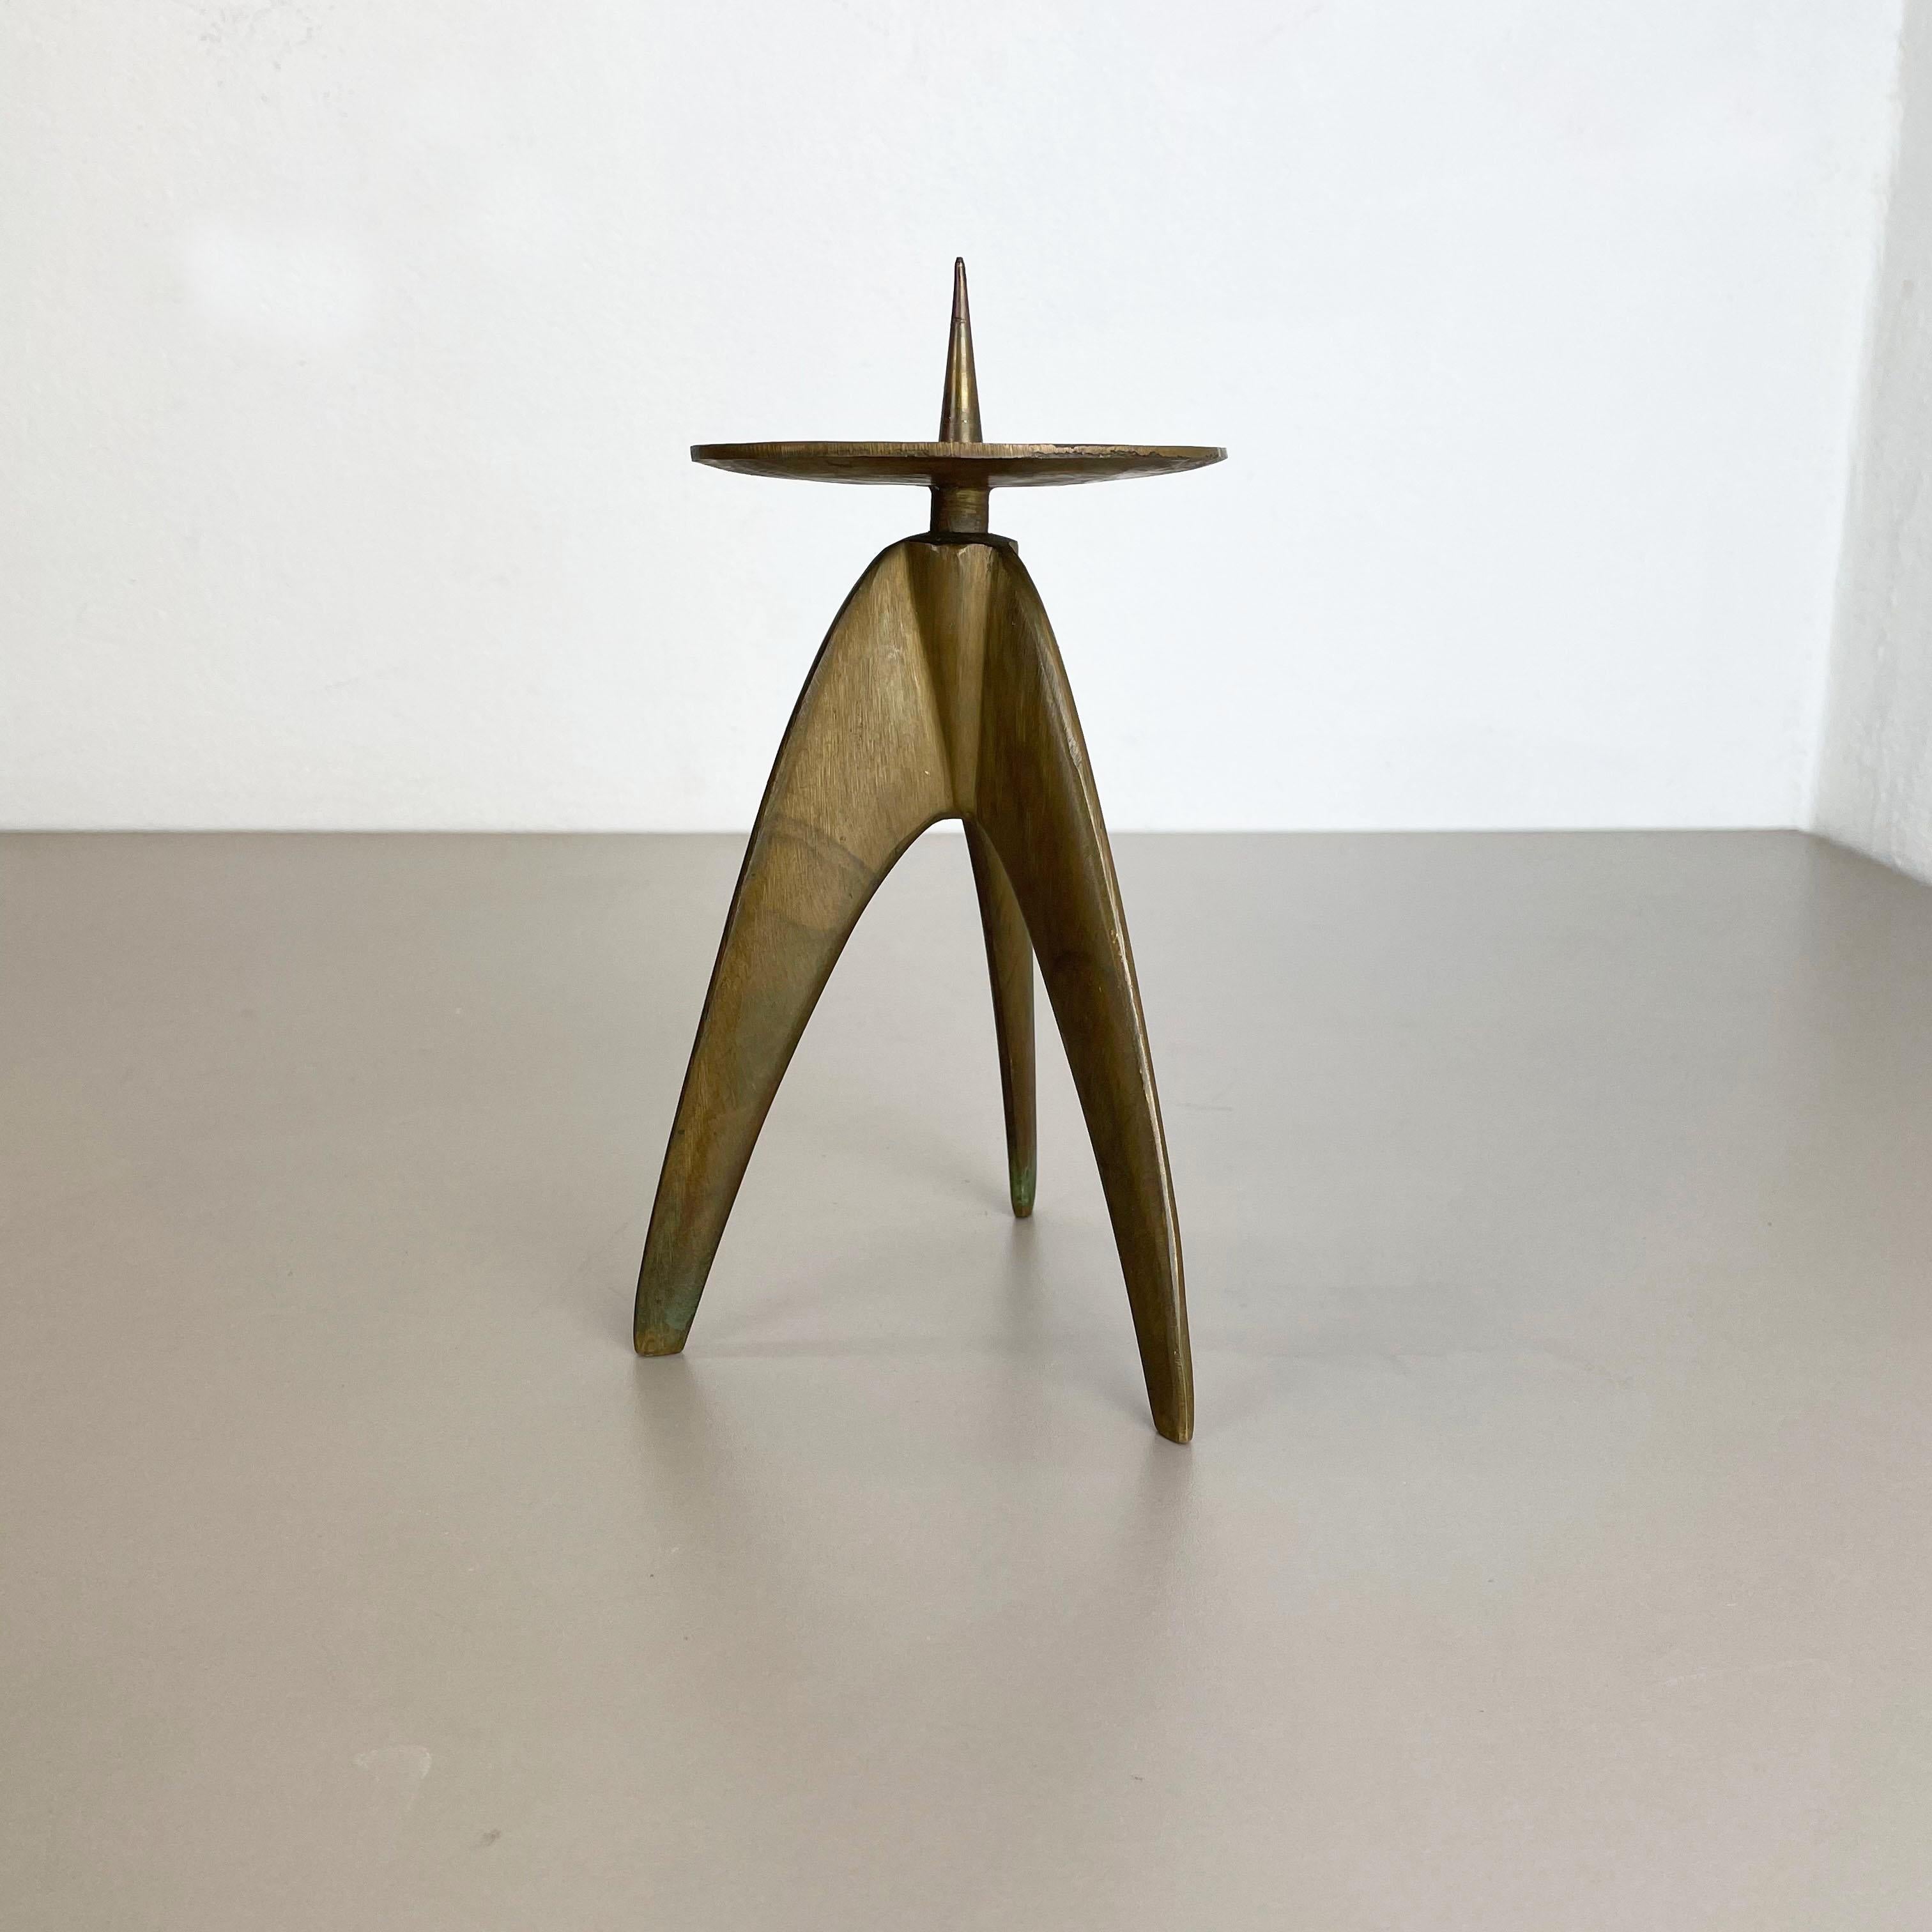 Article:

Sculptural candleholder


Origin:

Germany


Material:

Solid brass


Decade:

1970s




This original vintage candleholder, was produced in the 1970s in Germany. It is made of solid brass, and has a lovely patination